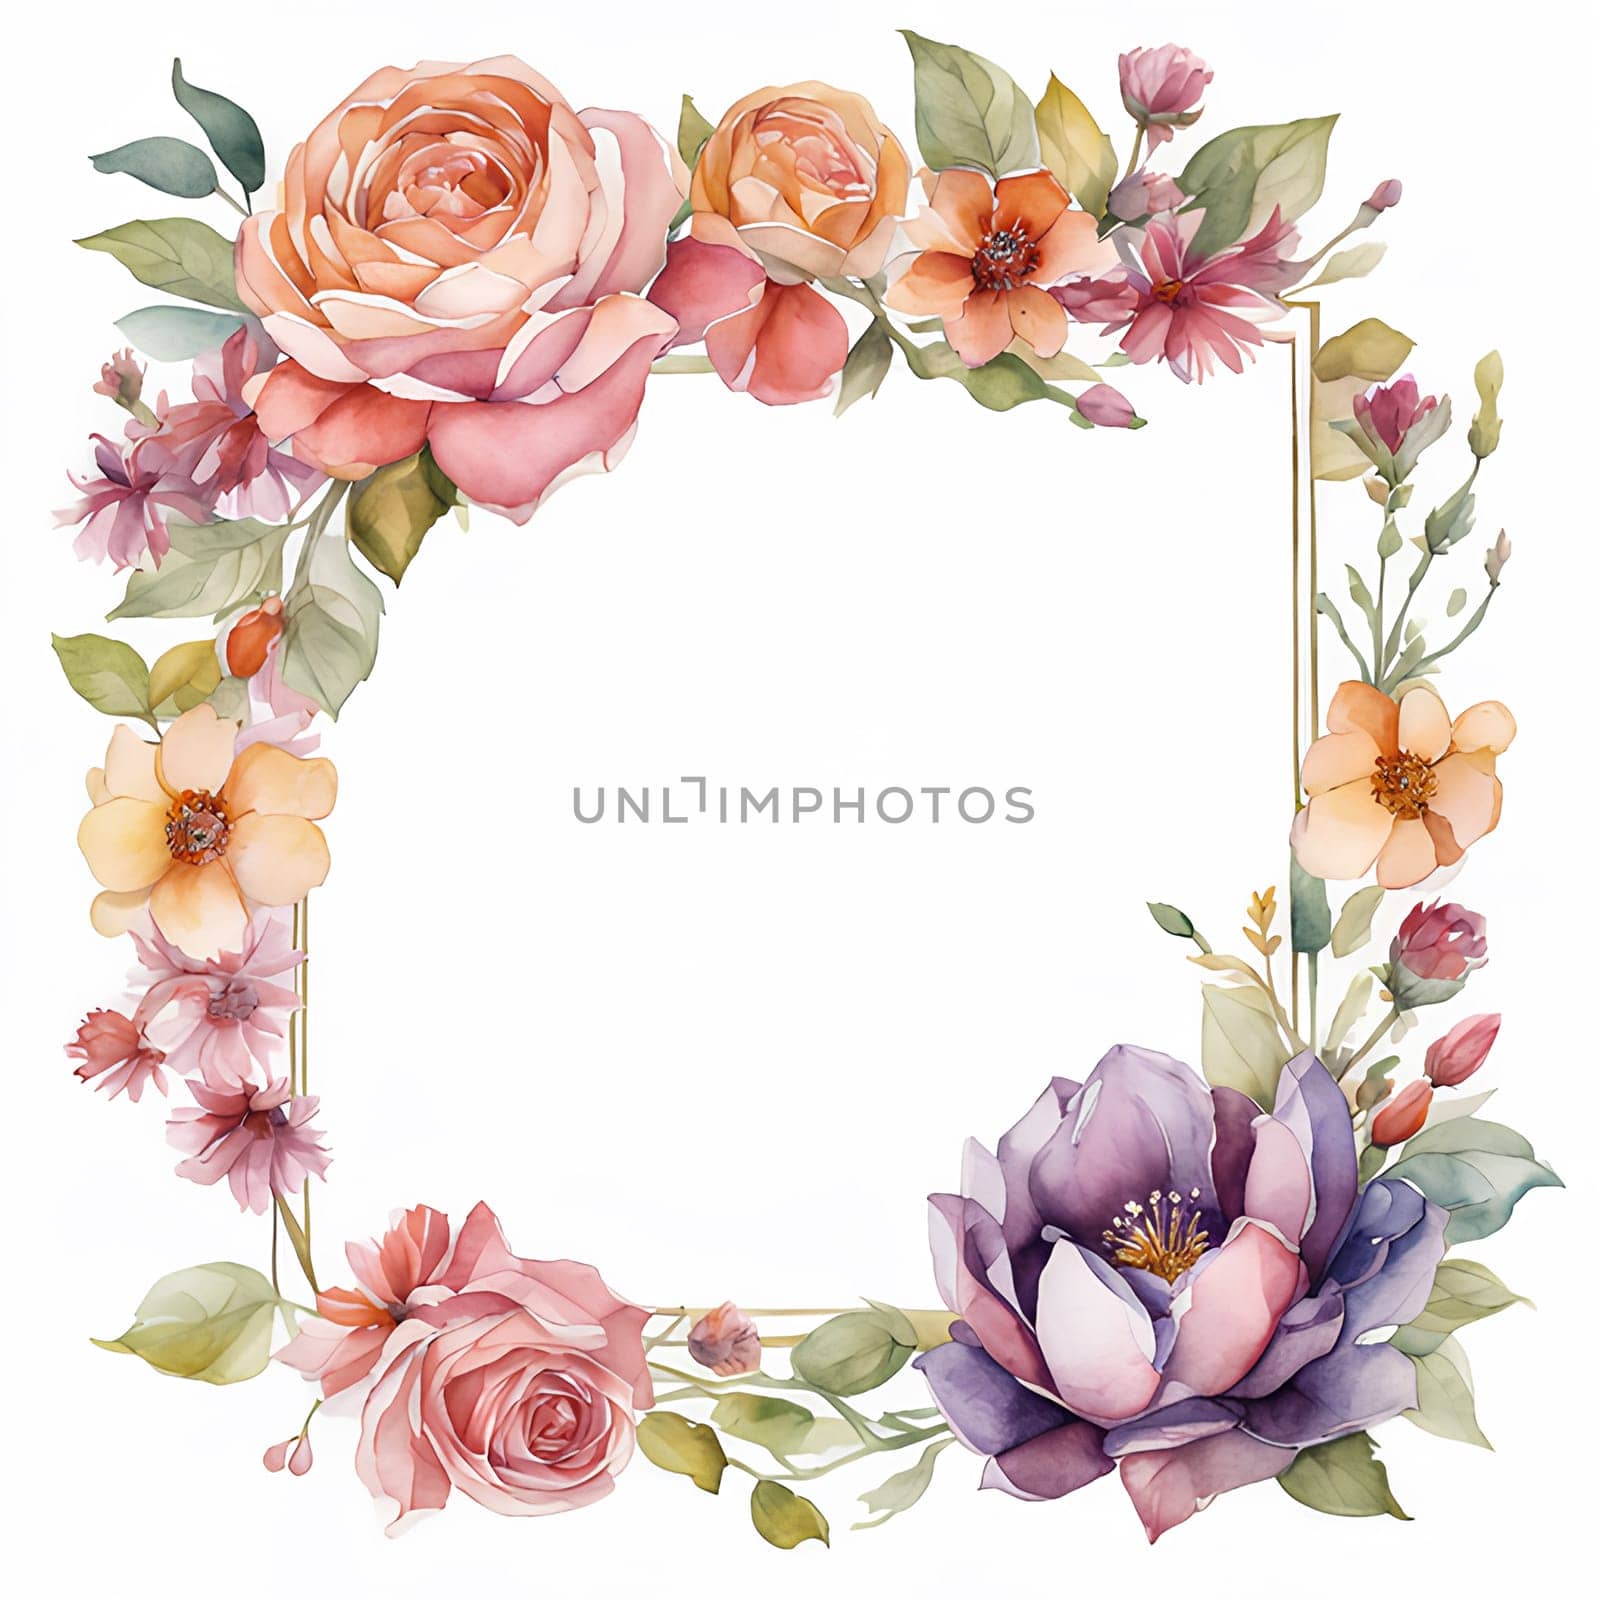 Framing flowers on white background with copy space, watercolor illustration